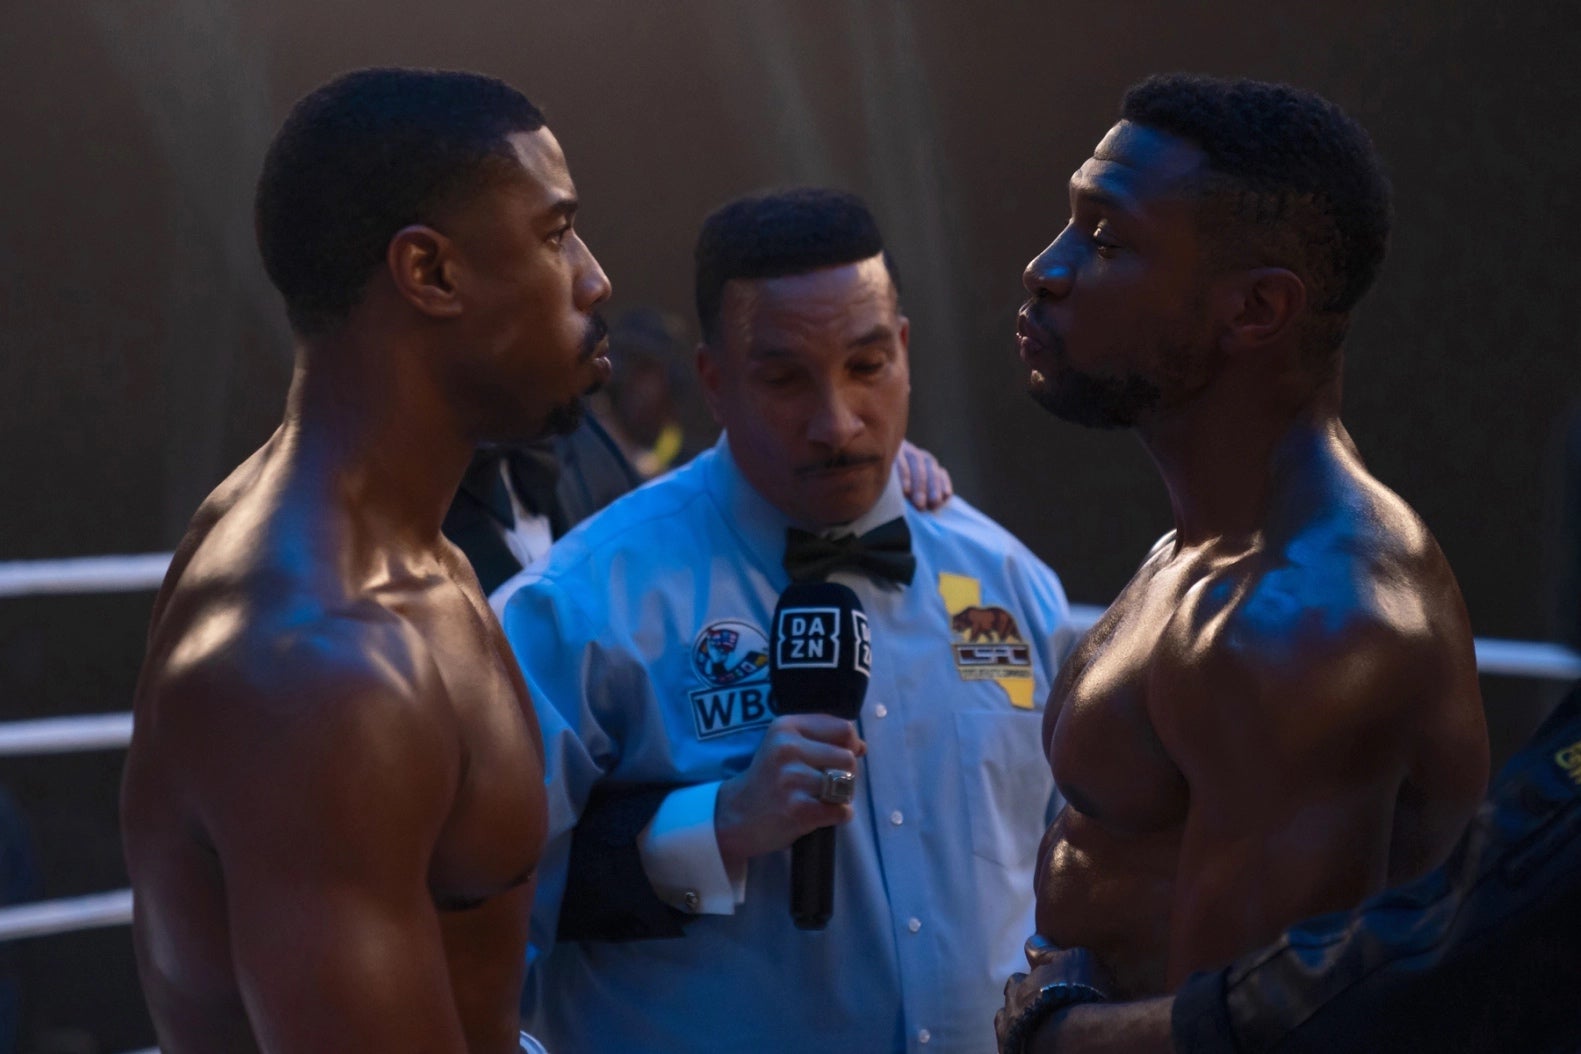 ‘Creed III’ Owns The Box Office, Earning $58.6M During Its Opening Weekend